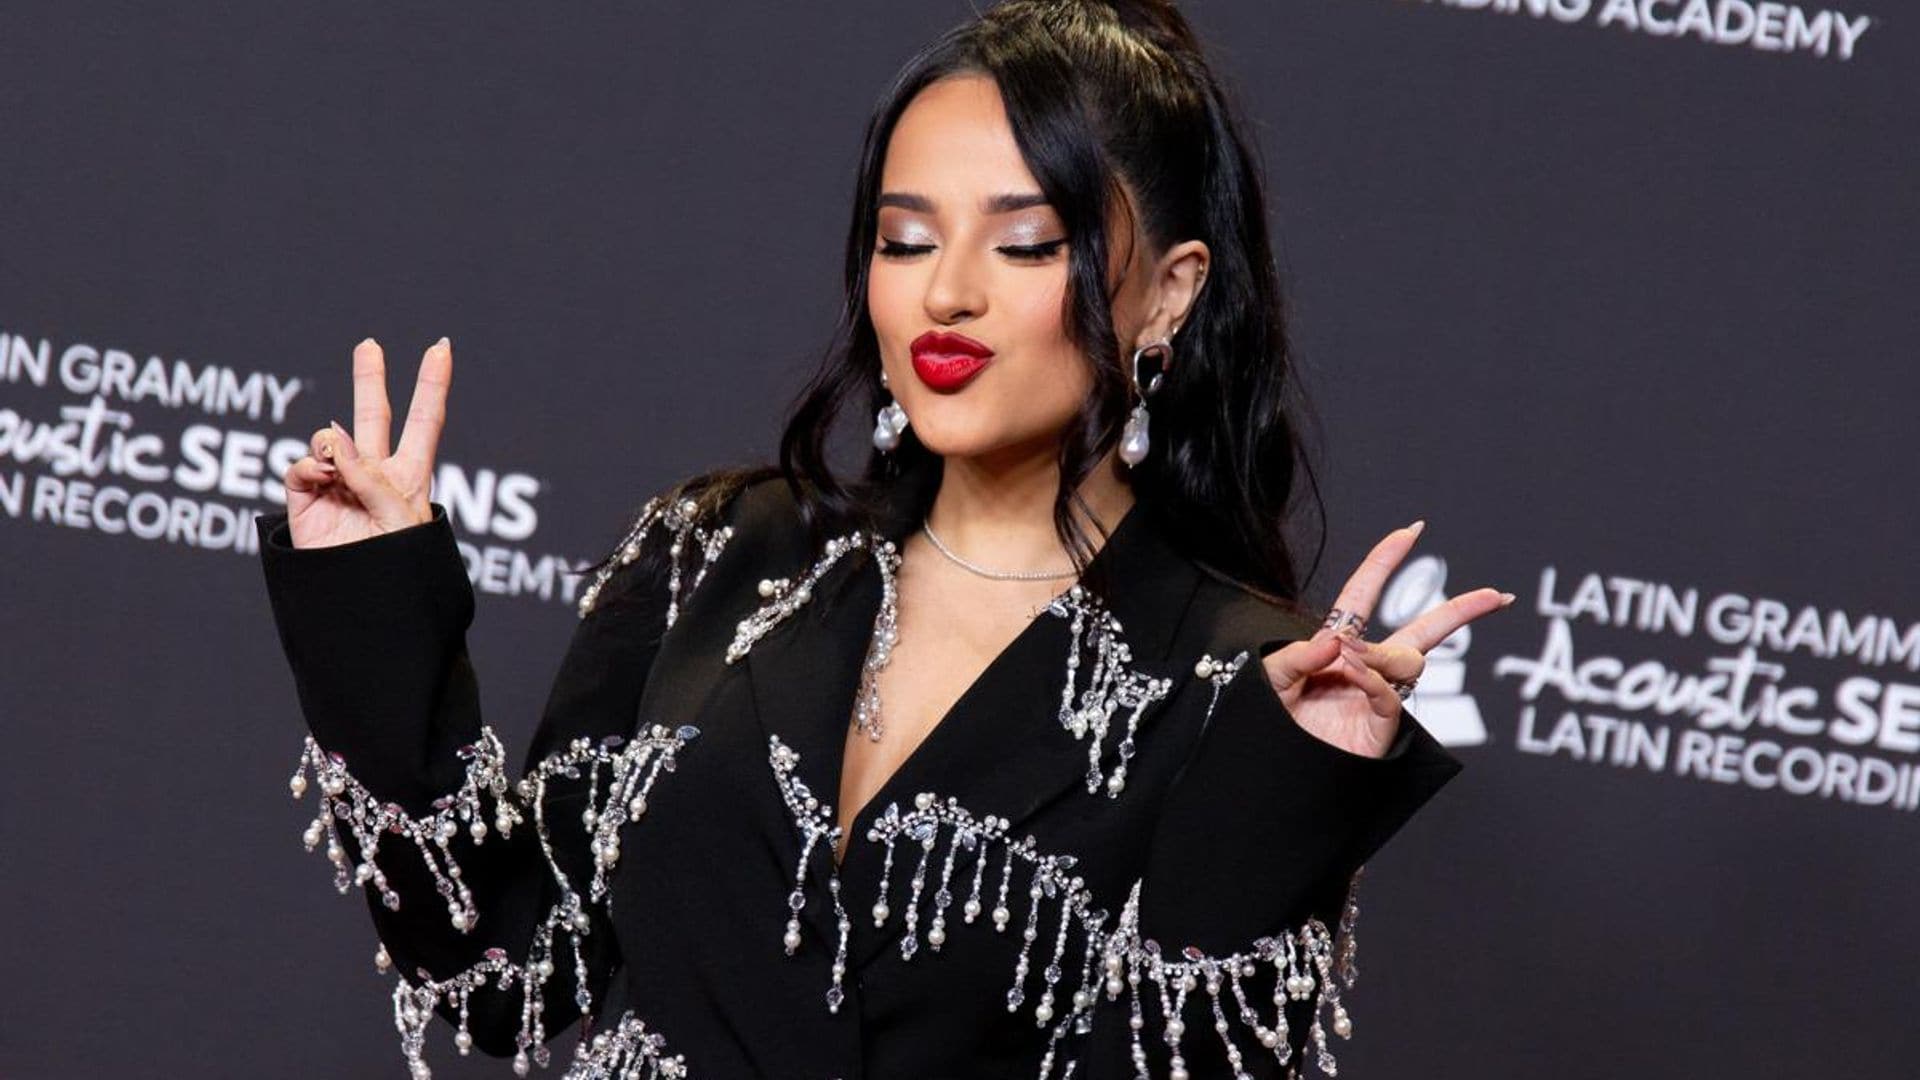 Becky G gives a glimpse at 2022 Latin Grammy fashion trends at the Acoustic Sessions